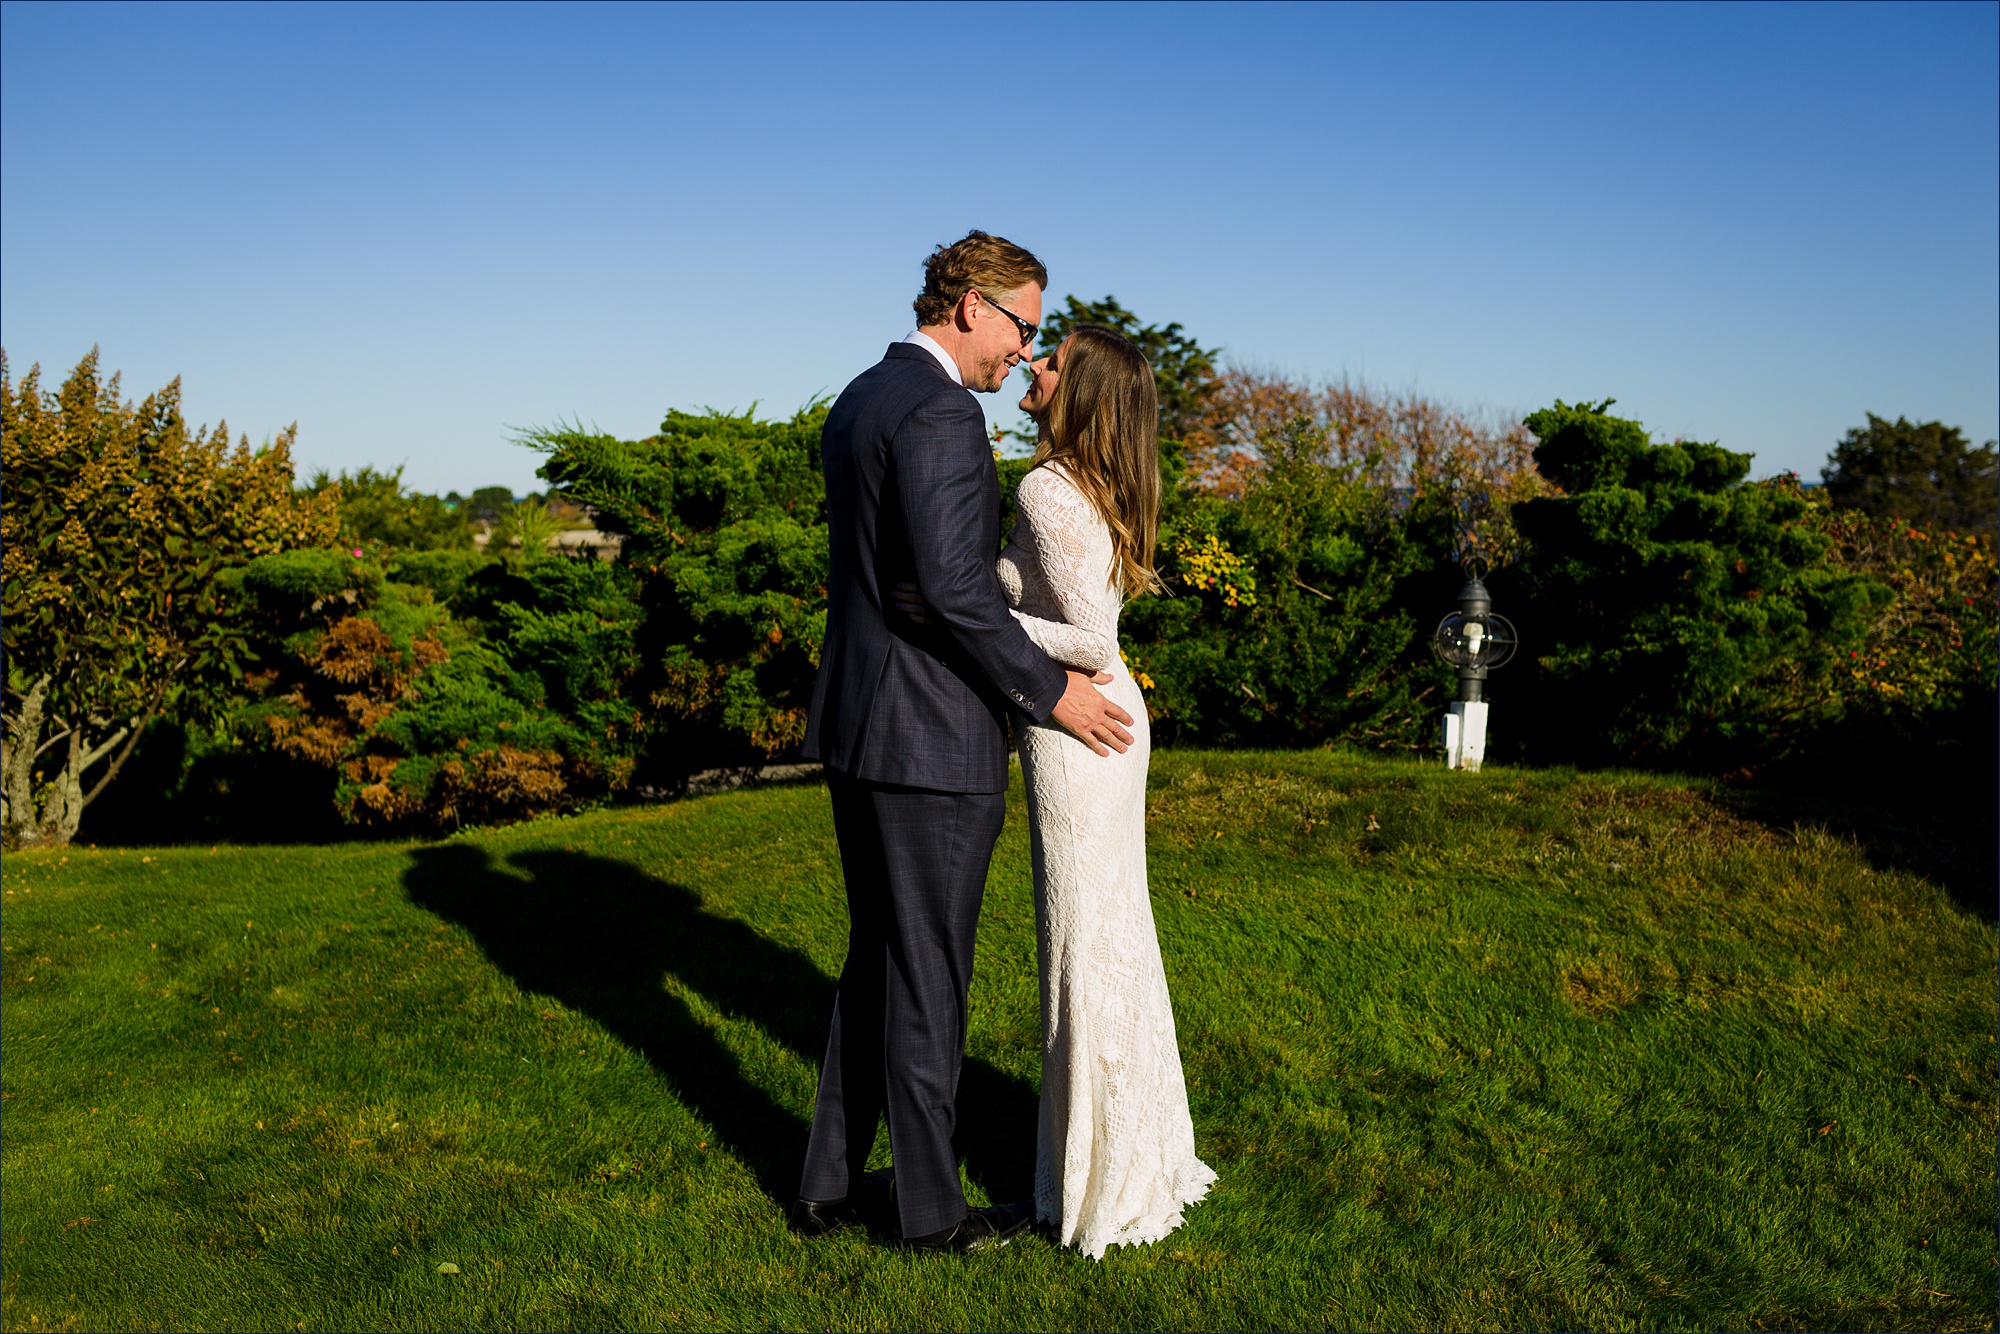 First look for the bride and groom out on the front lawn of Cape Arundel Inn in Maine